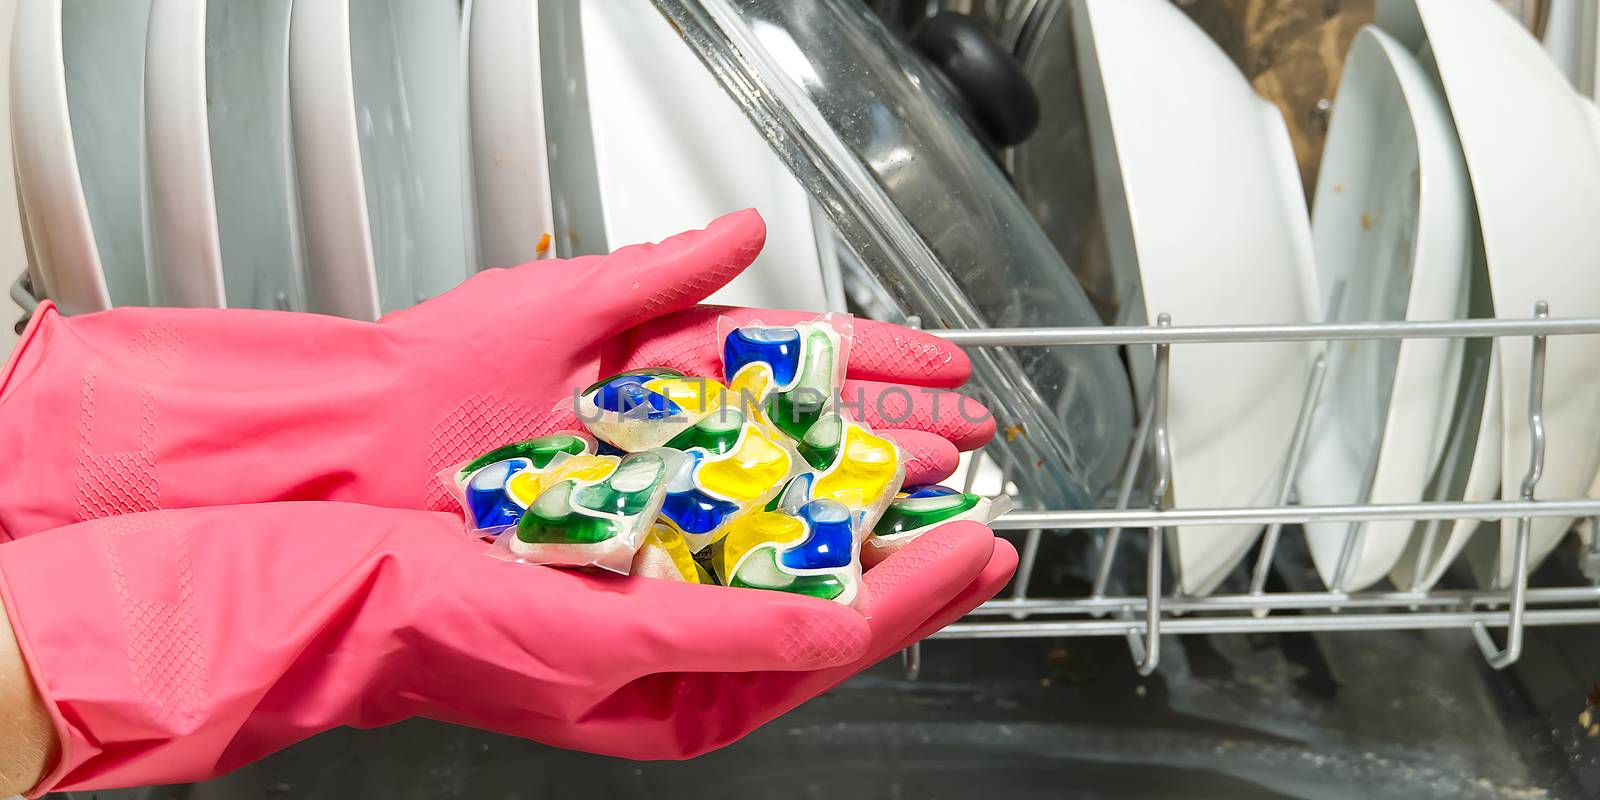 Dishwasher Detergents in hands. hands in pink golvs holds dishwasher gel capsules. Brilliant cleanliness. Capsule for the dishwasher.